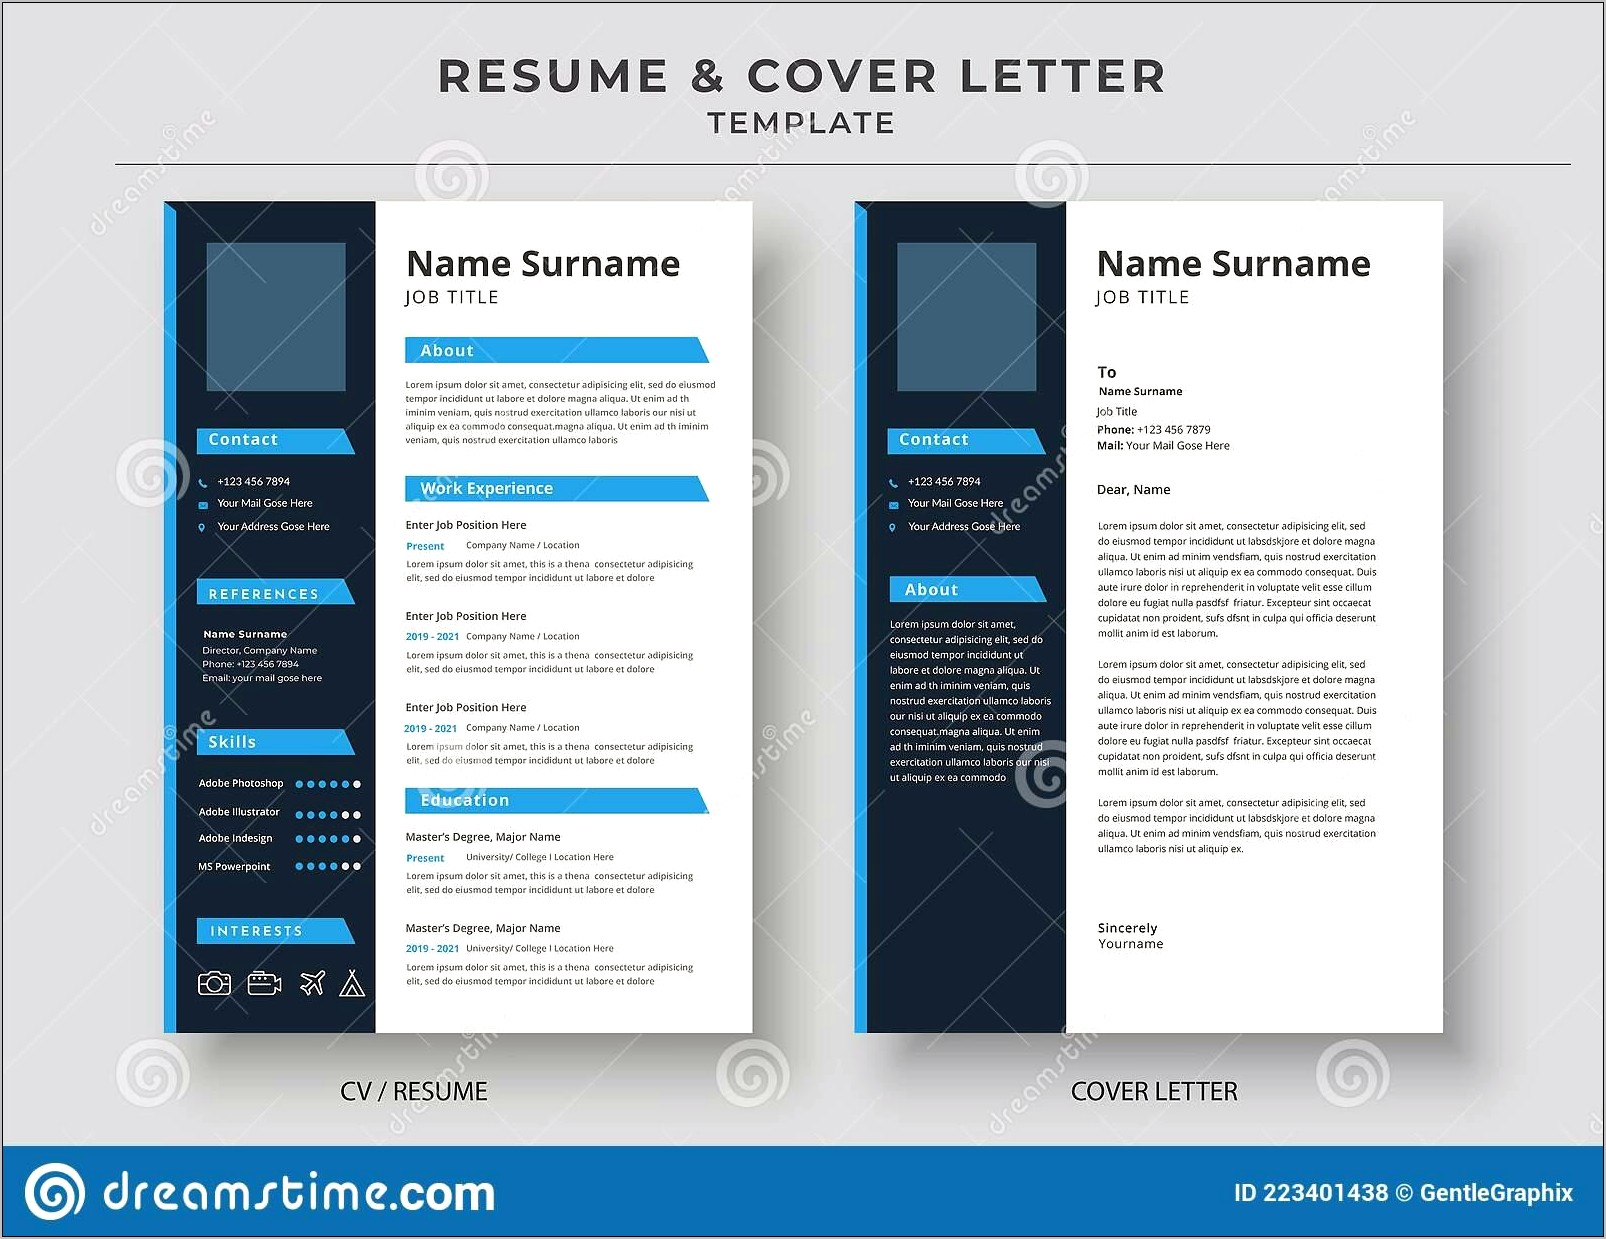 Free Resume And Cover Letter Template Indesign